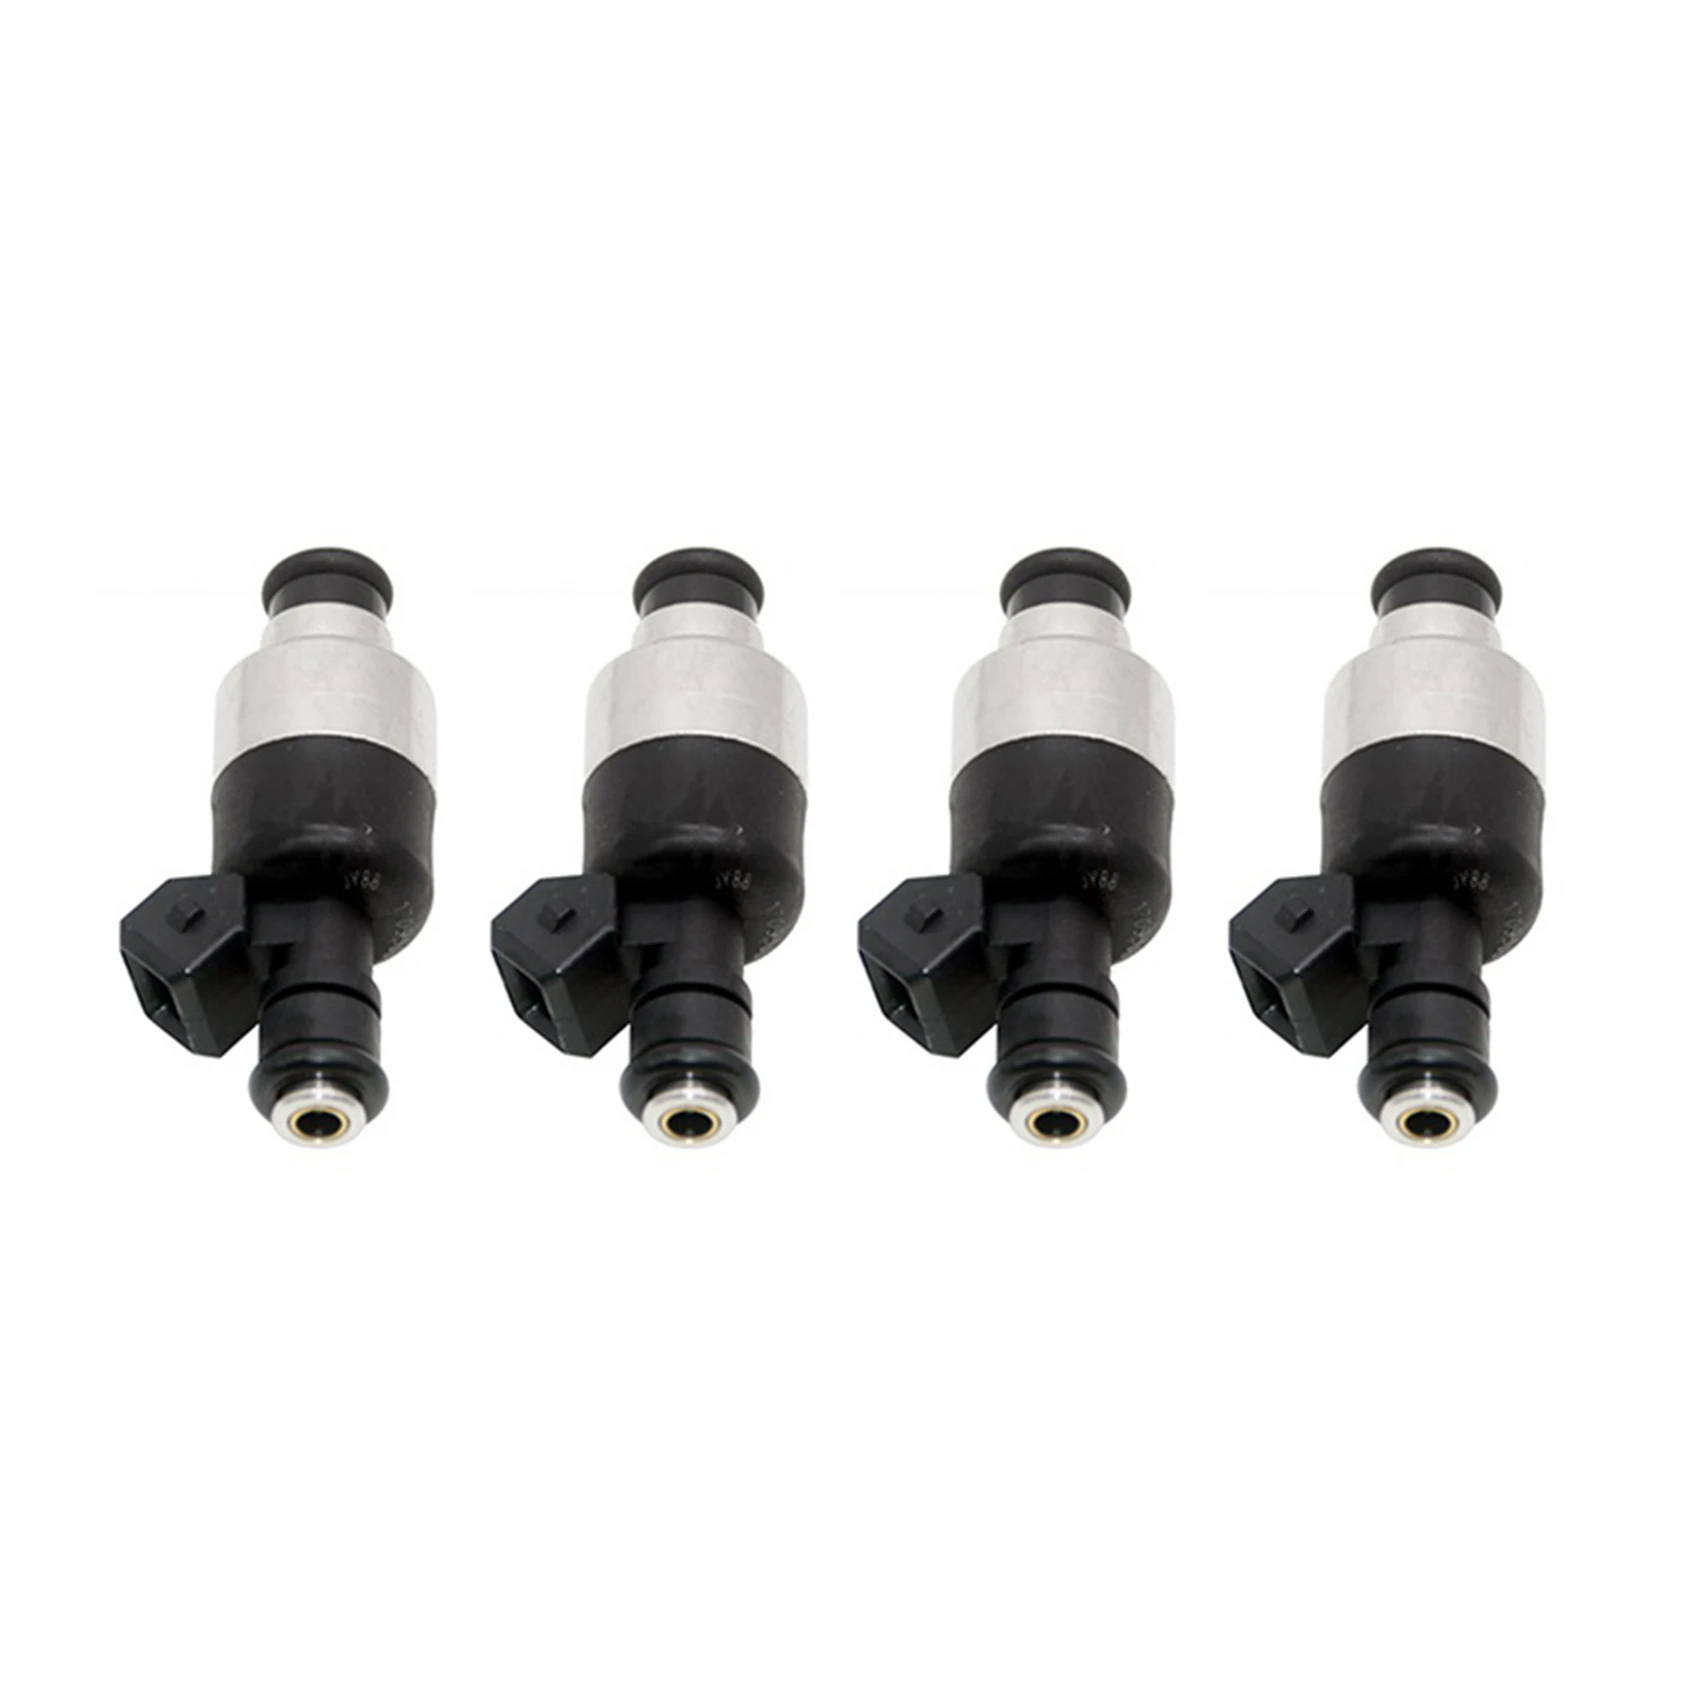 

4Pcs Fue Injector for Chevy Opel Corsa Daewoo Cielo 1.6 17124782 17123924 25165453 17103677 ICD00110 17108045